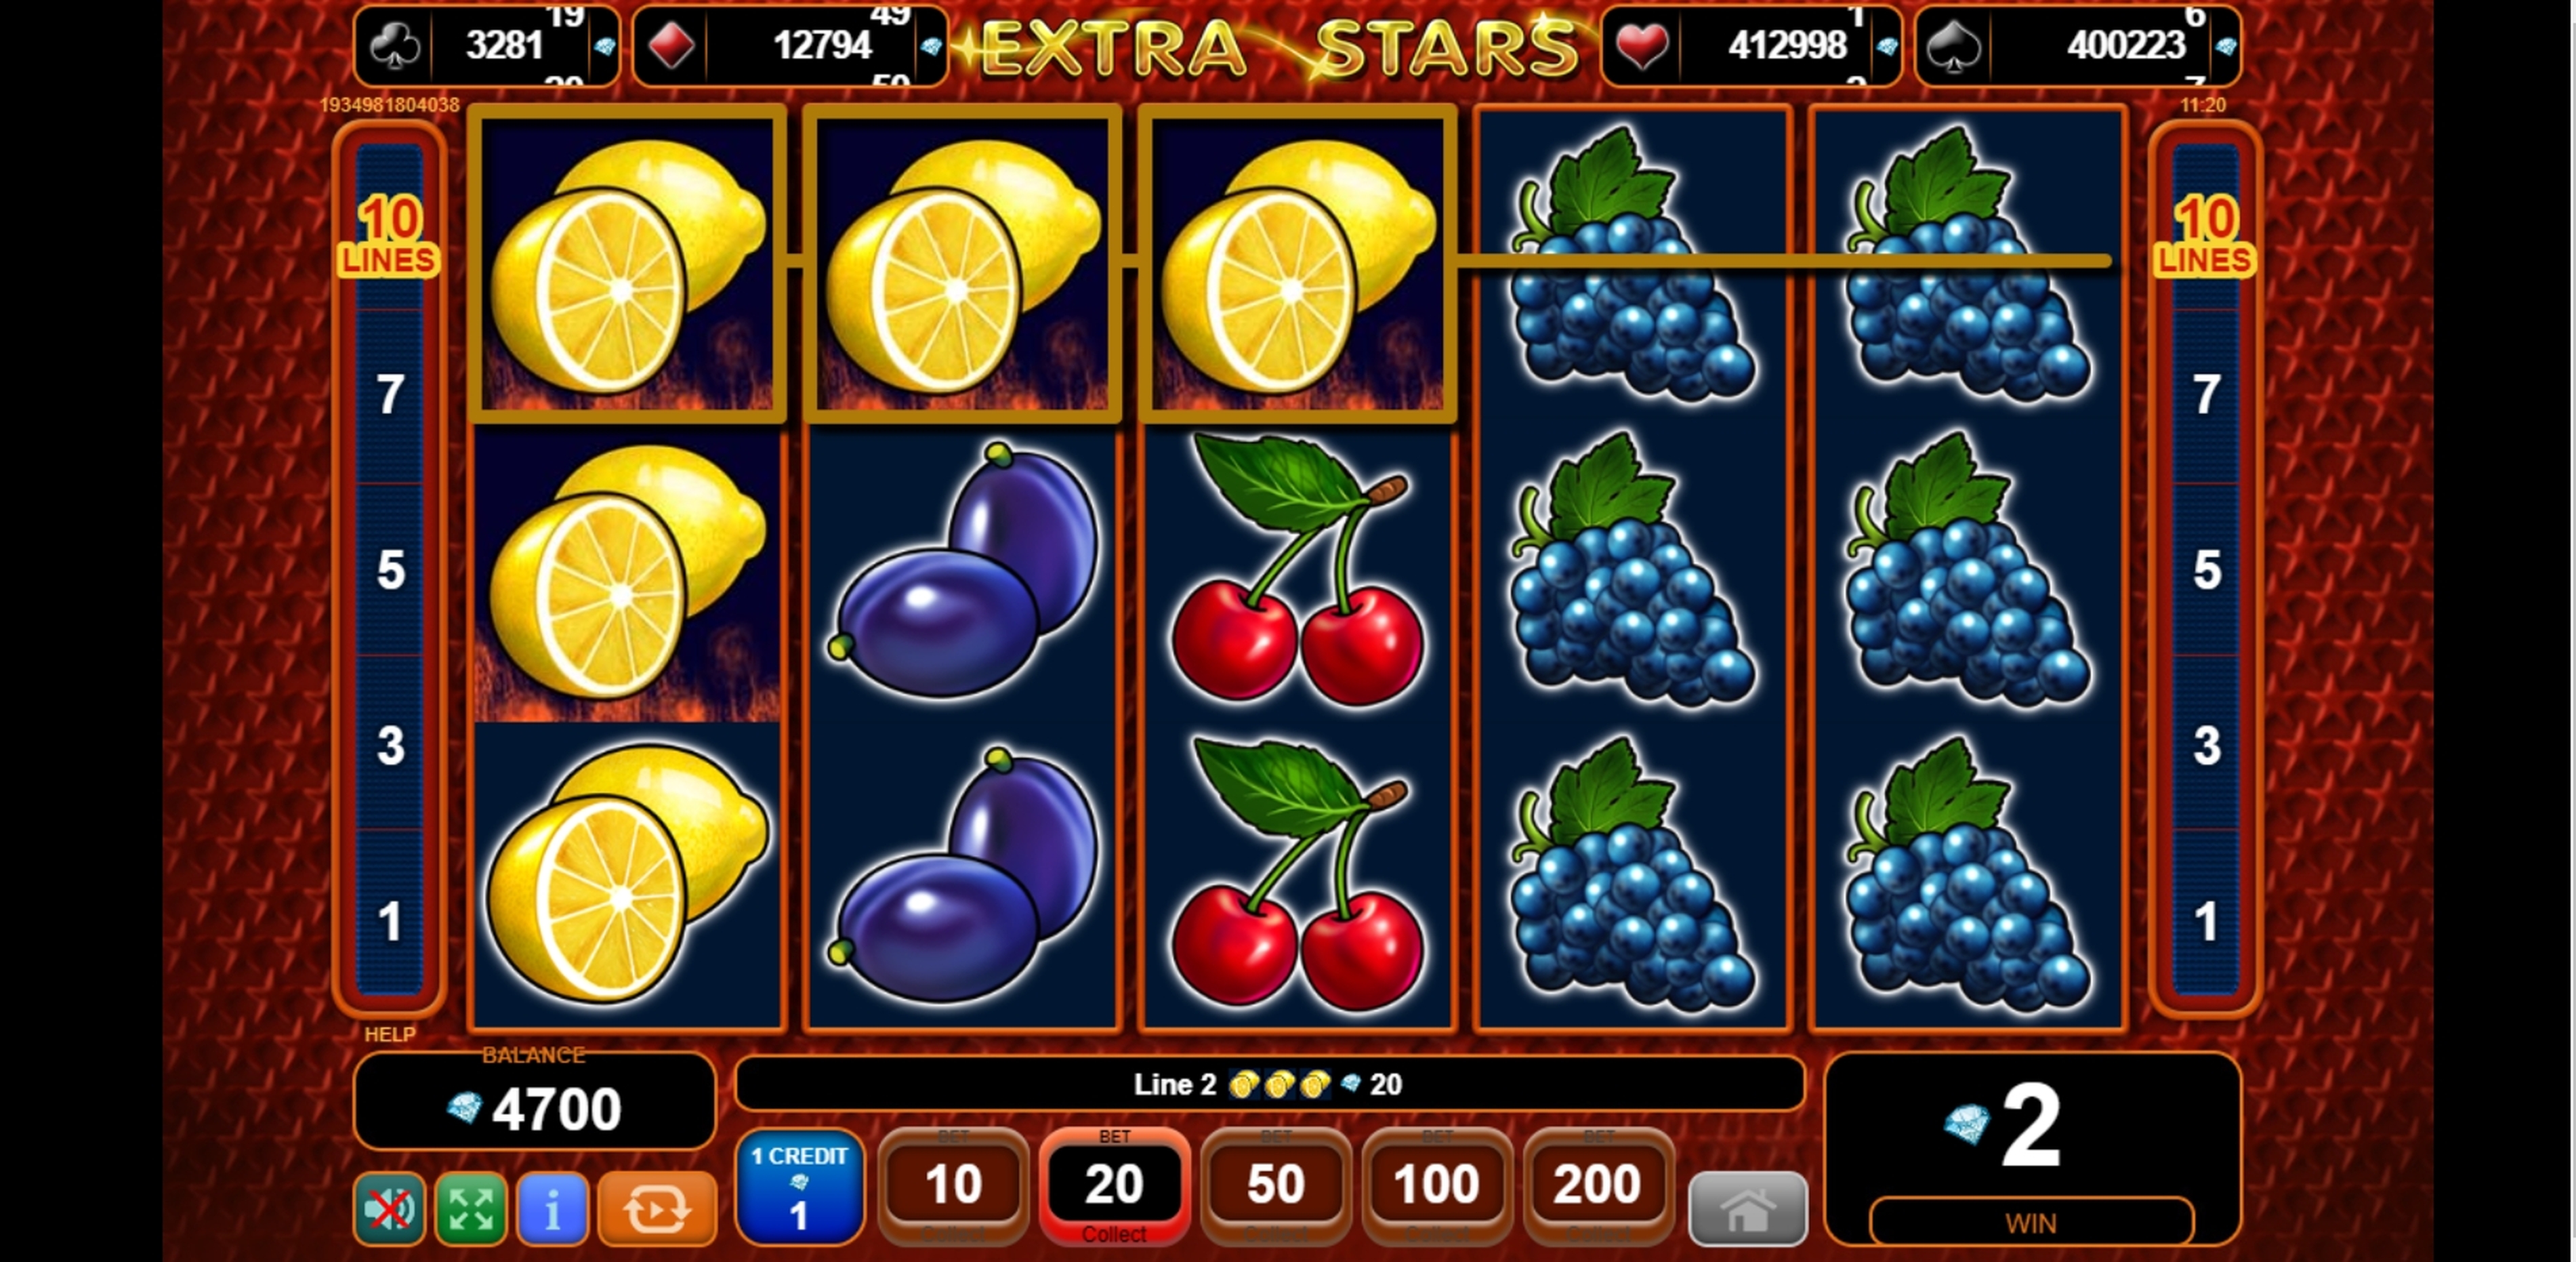 Win Money in Extra Stars Free Slot Game by EGT